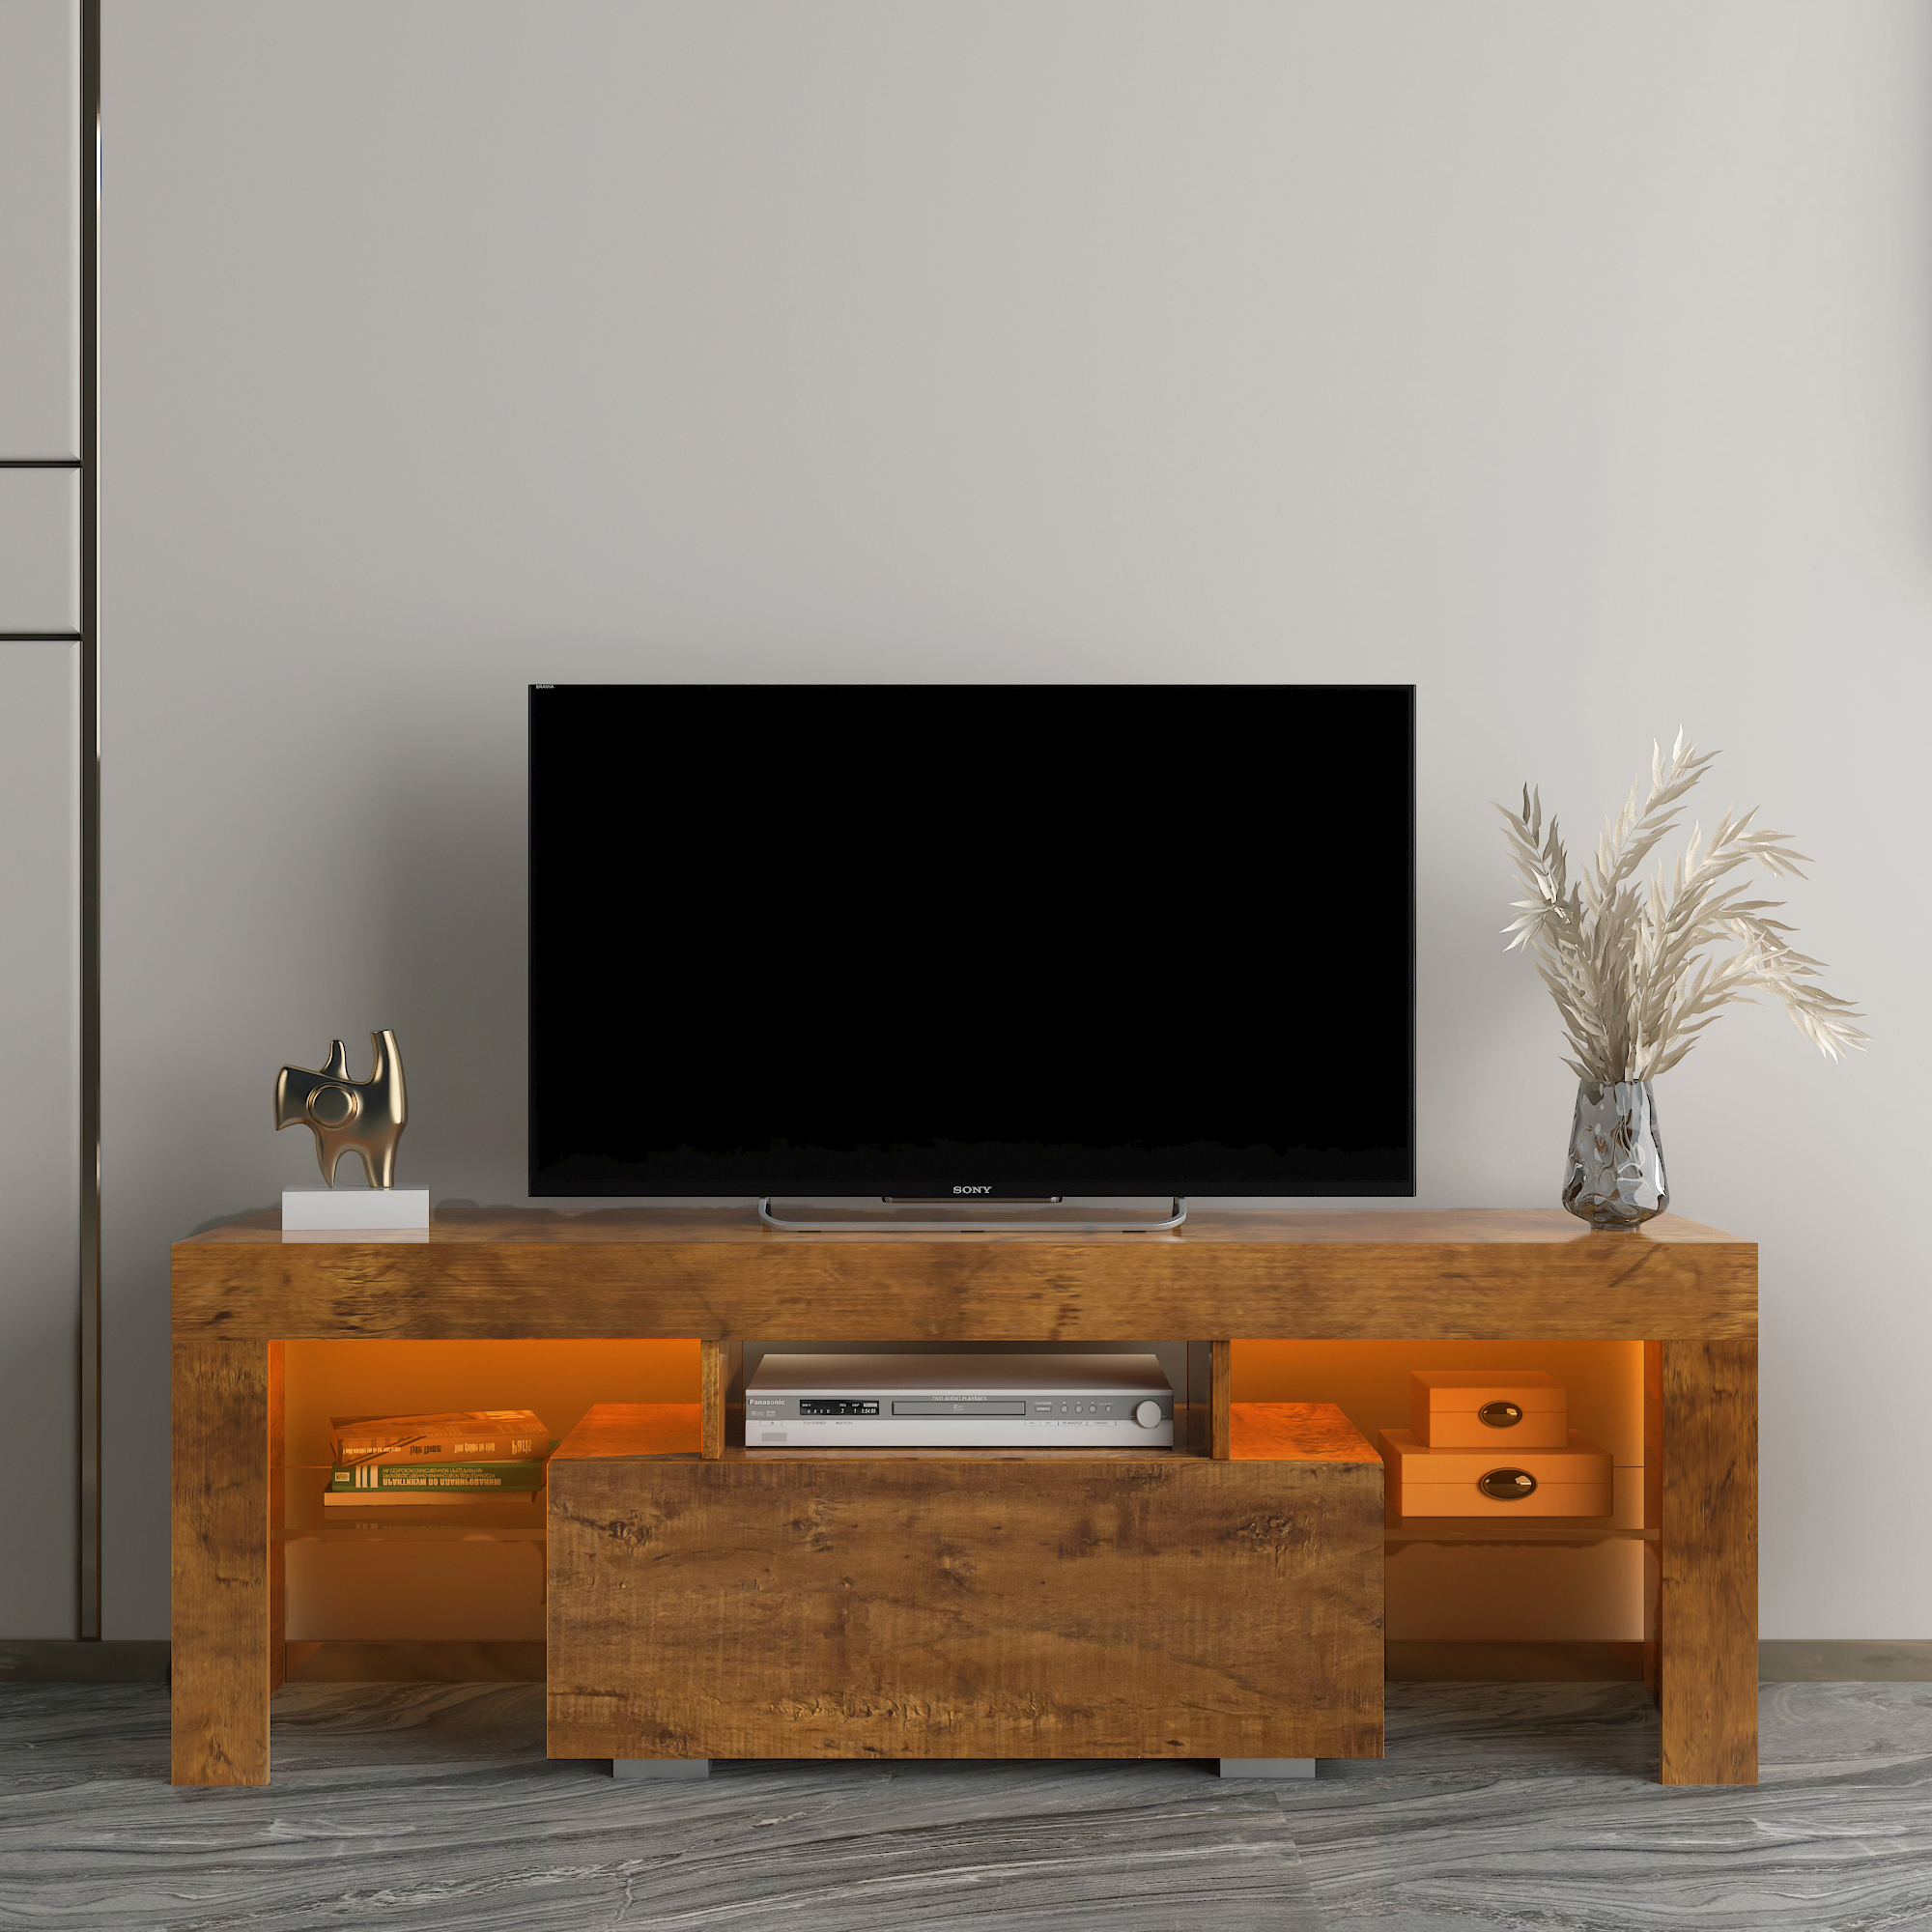 TV Stand with LED RGB Lights,Flat Screen TV Cabinet, Gaming Consoles - in Lounge Room, Living Room,FIR WOOD-CASAINC